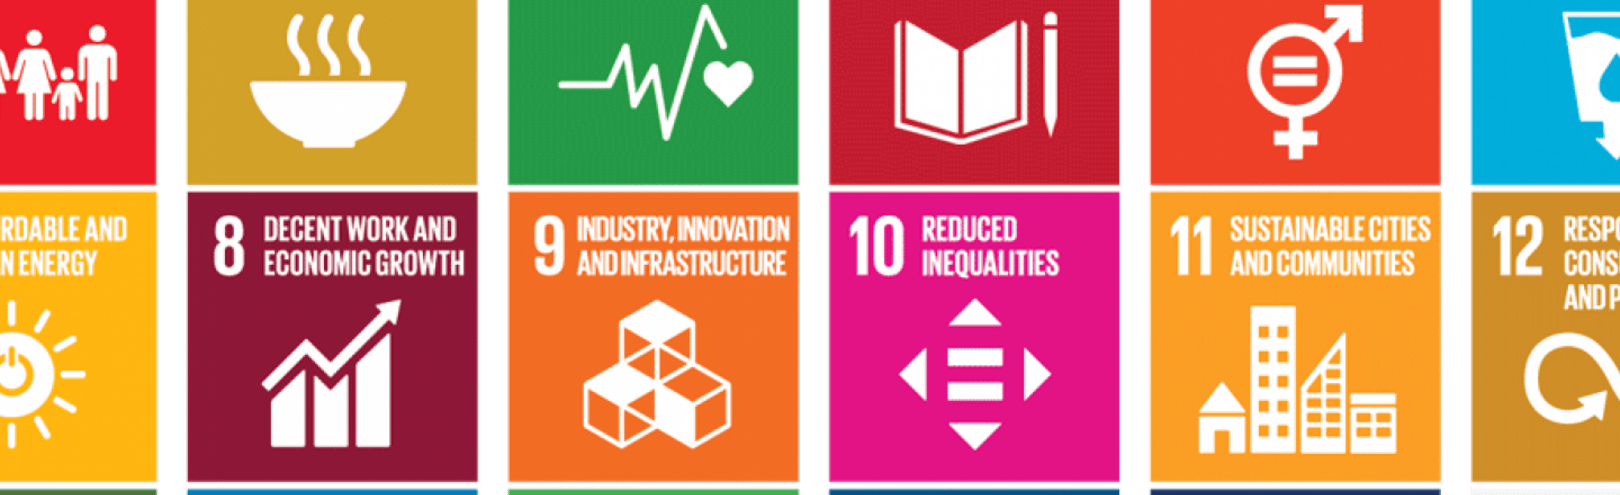 Ample opportunity for UI in the UN Sustainable Development Goals  - Available at University of Iceland